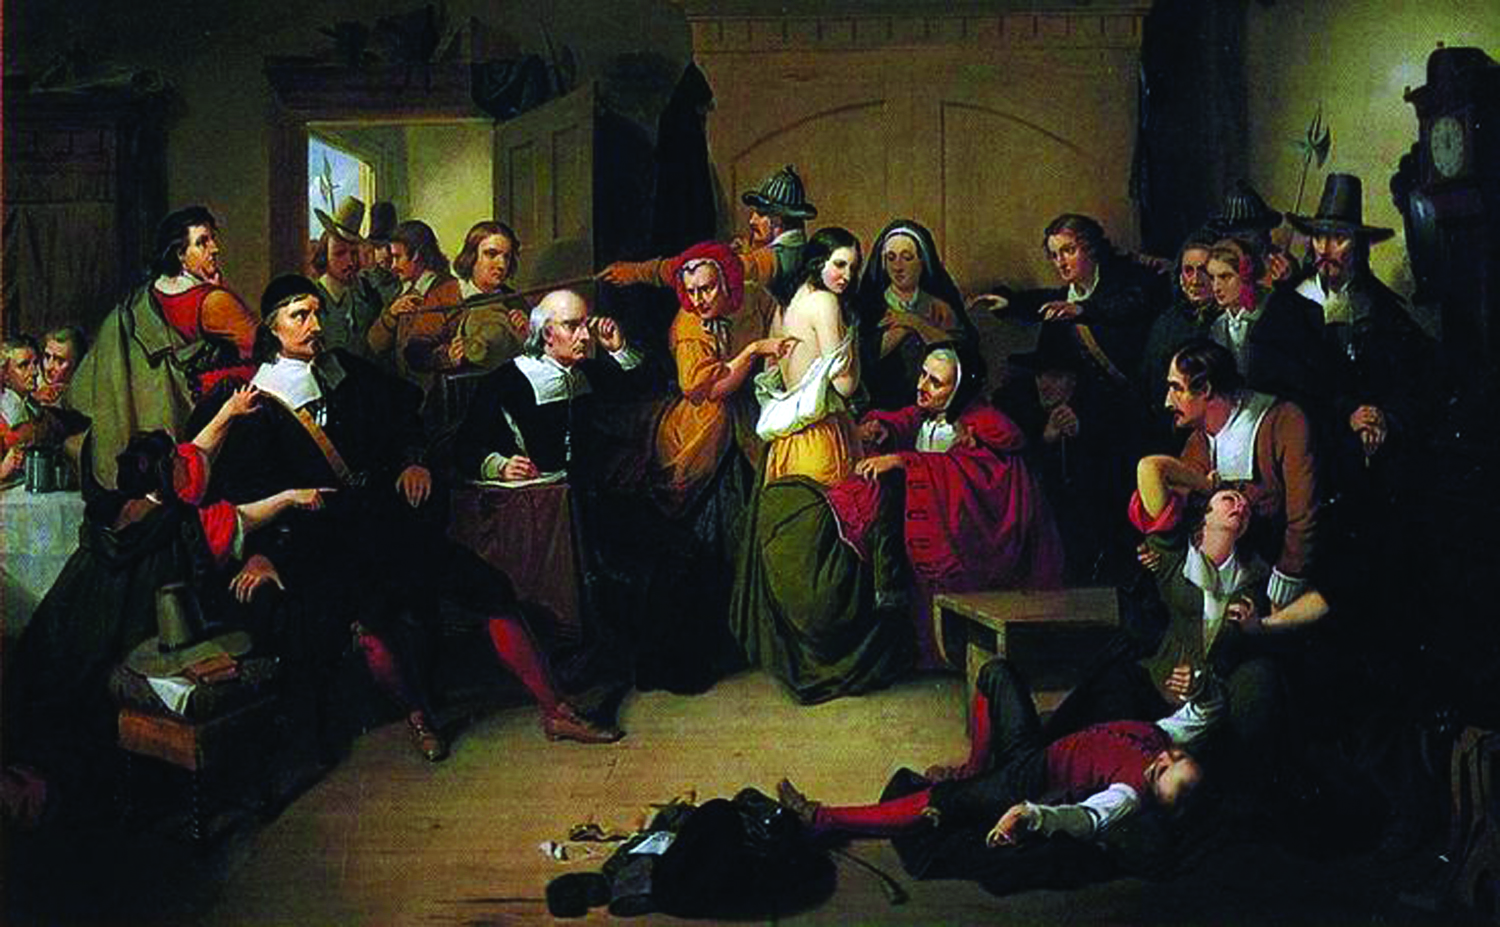 Examination of a Witch (1853) by T. H. Matteson, a painting said to be inspired by the Salem witch trials.